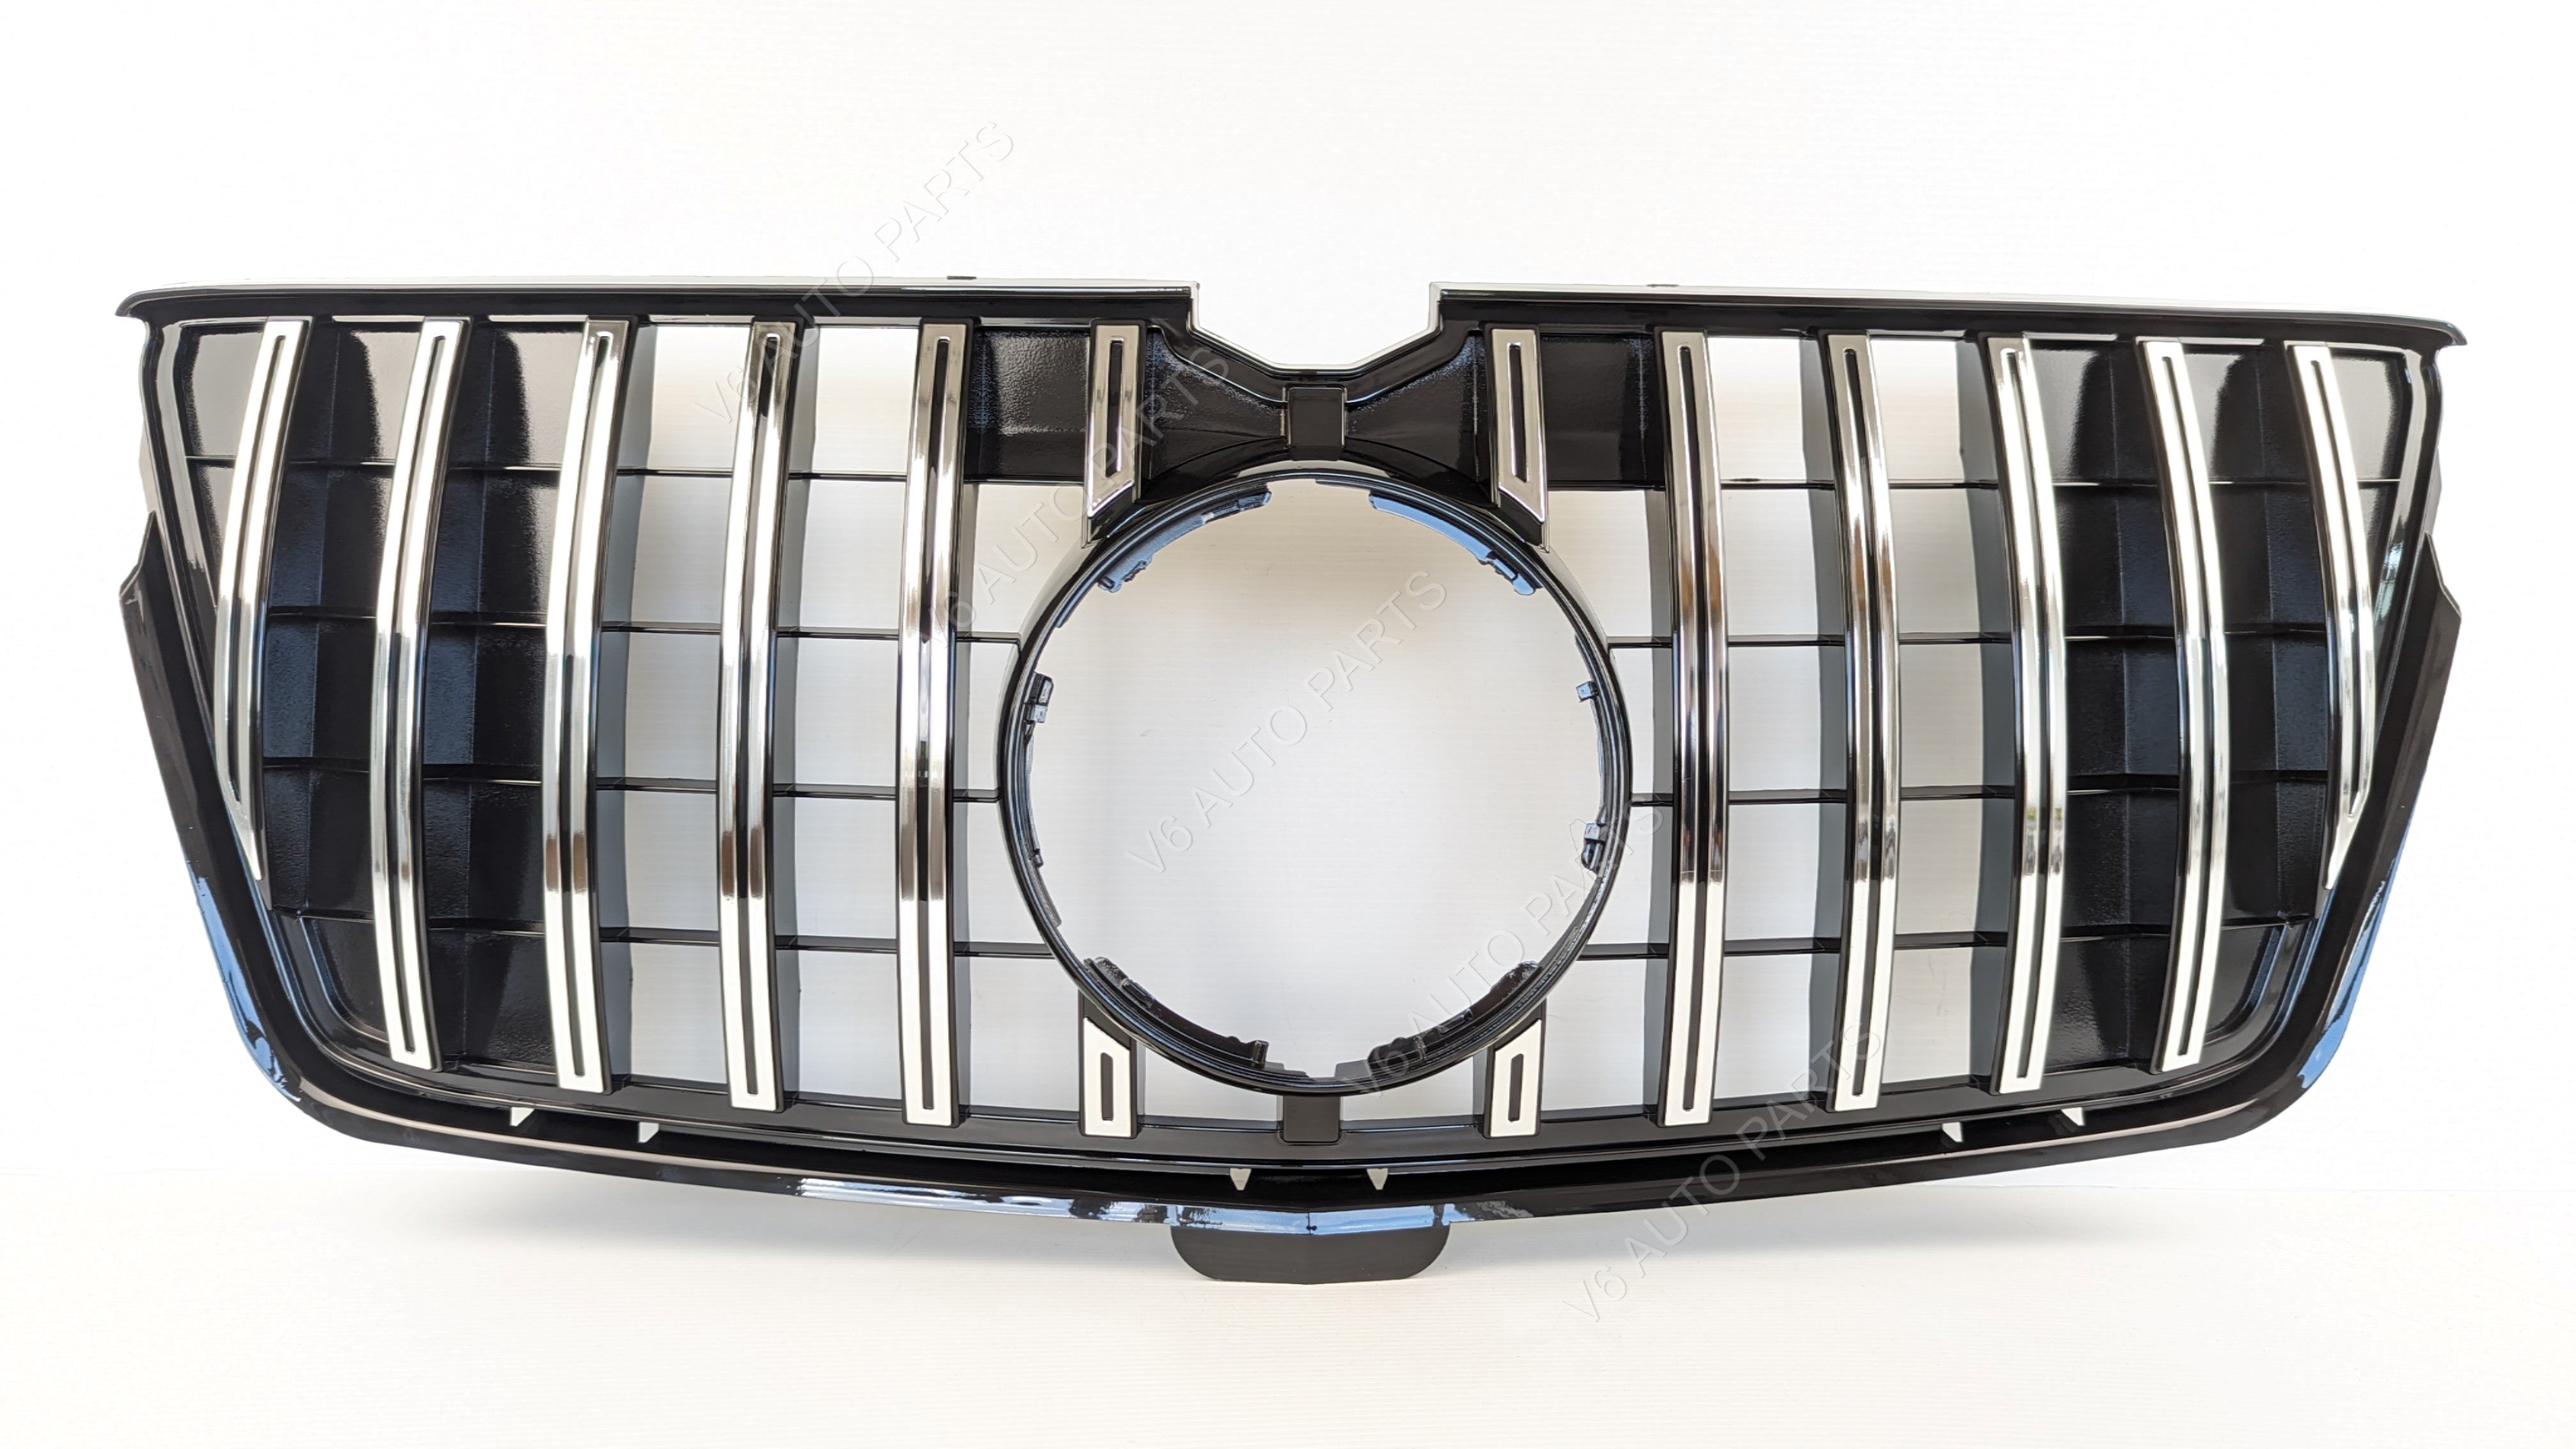 For Mercedes GL-Class X164 GL450 500 320 Front Bumper Chrome GT Grille 2009-2013